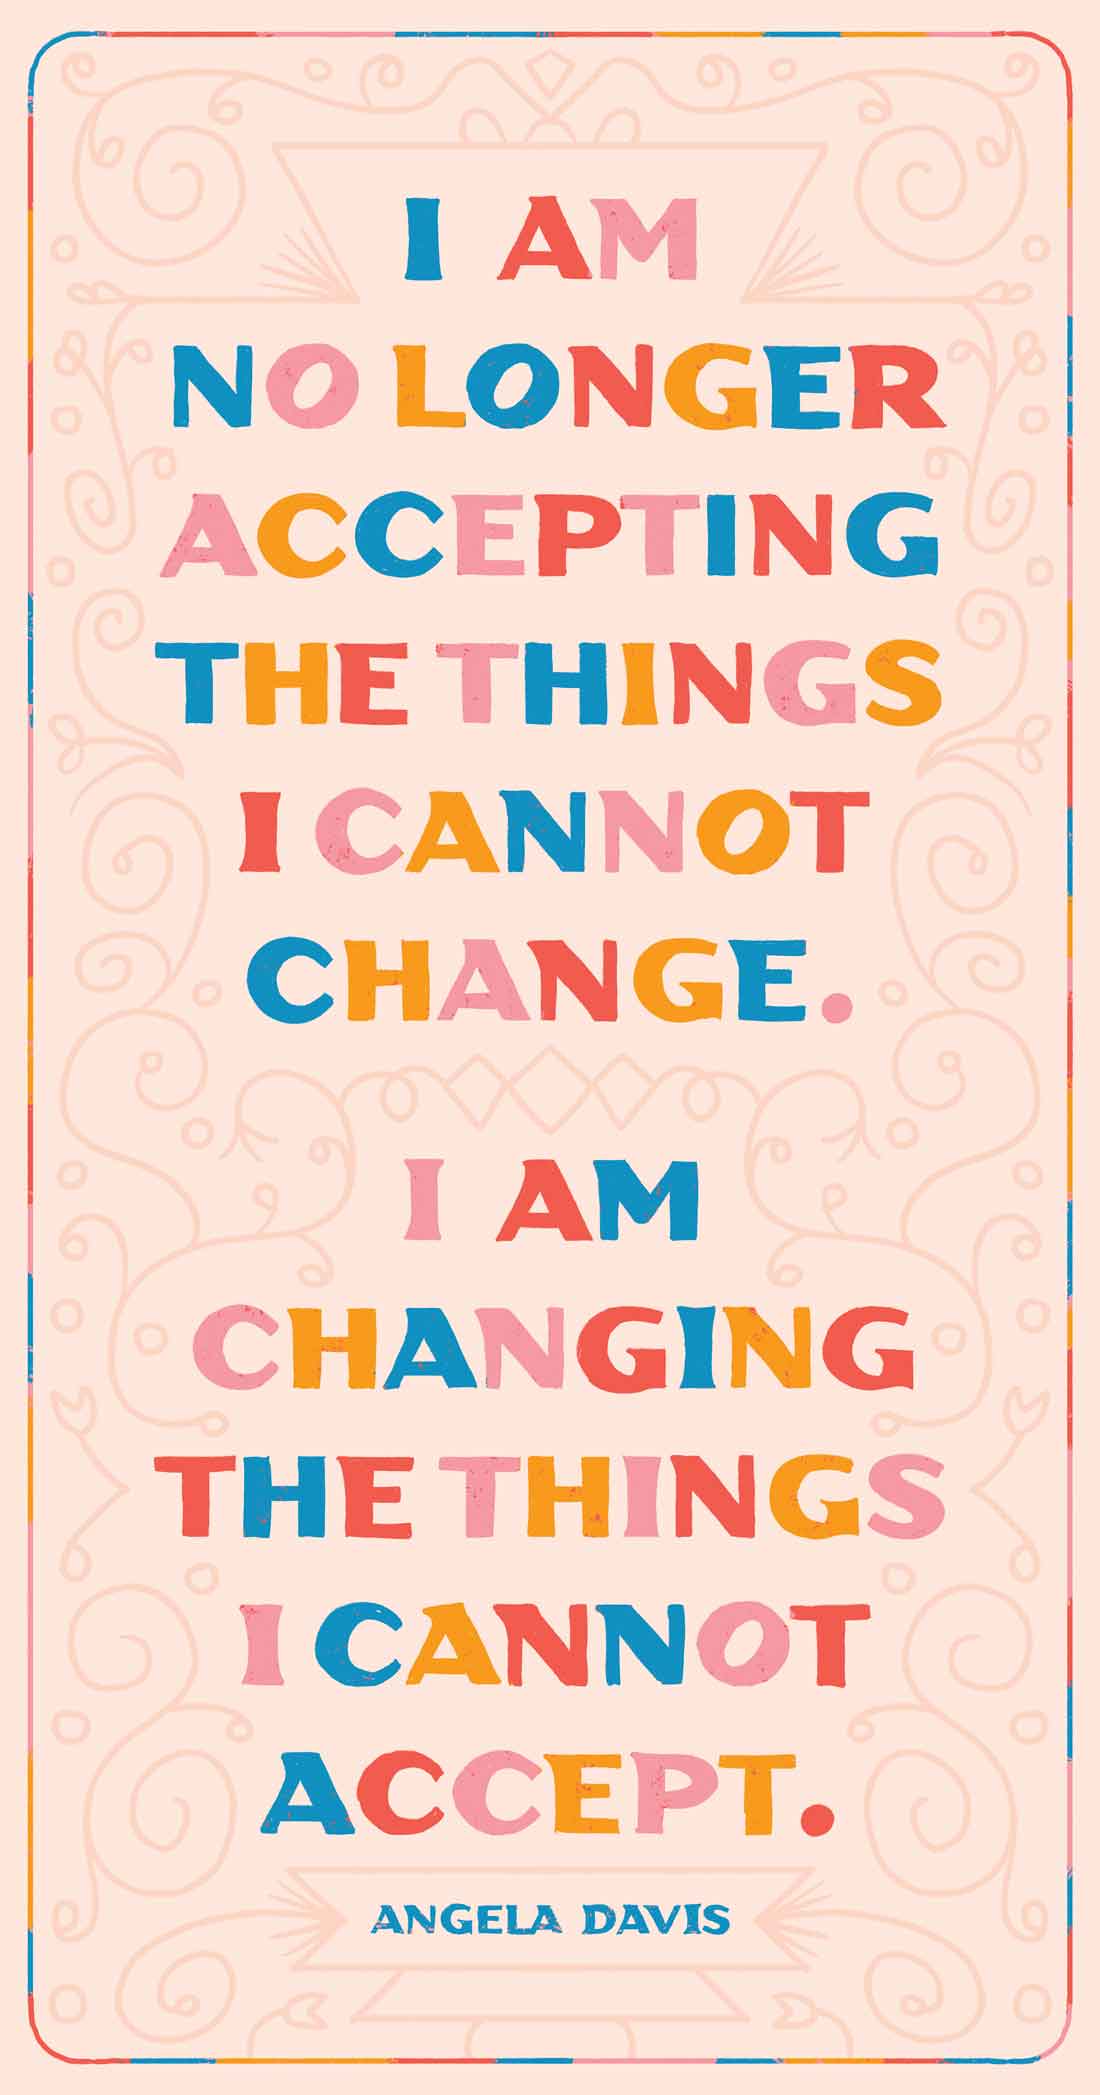 “I am no longer accepting the things I cannot change. I am changing the things I cannot accept.” — Angela Davis